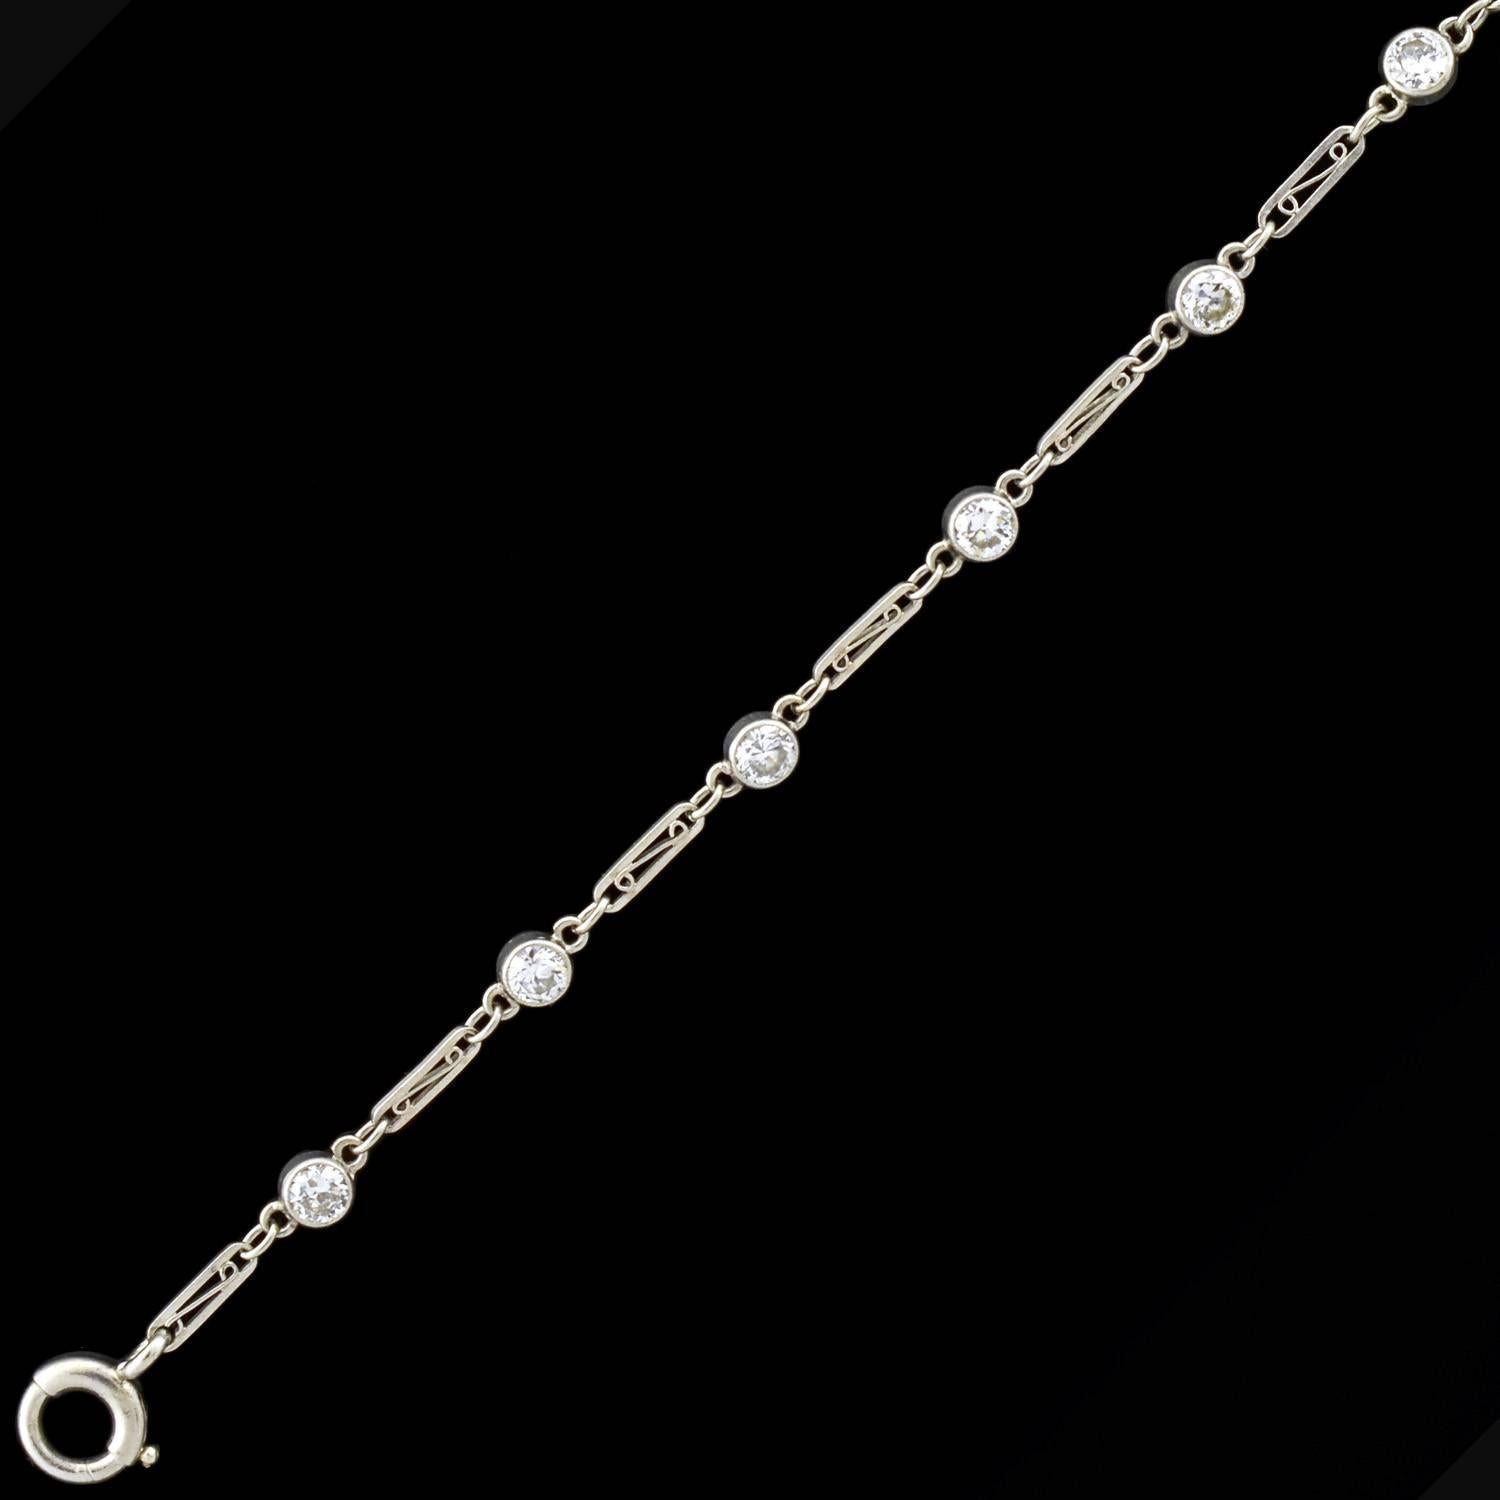 A beautiful diamond bracelet from the Art Deco (ca1920) era! Crafted in platinum, this stylish bracelet has a 